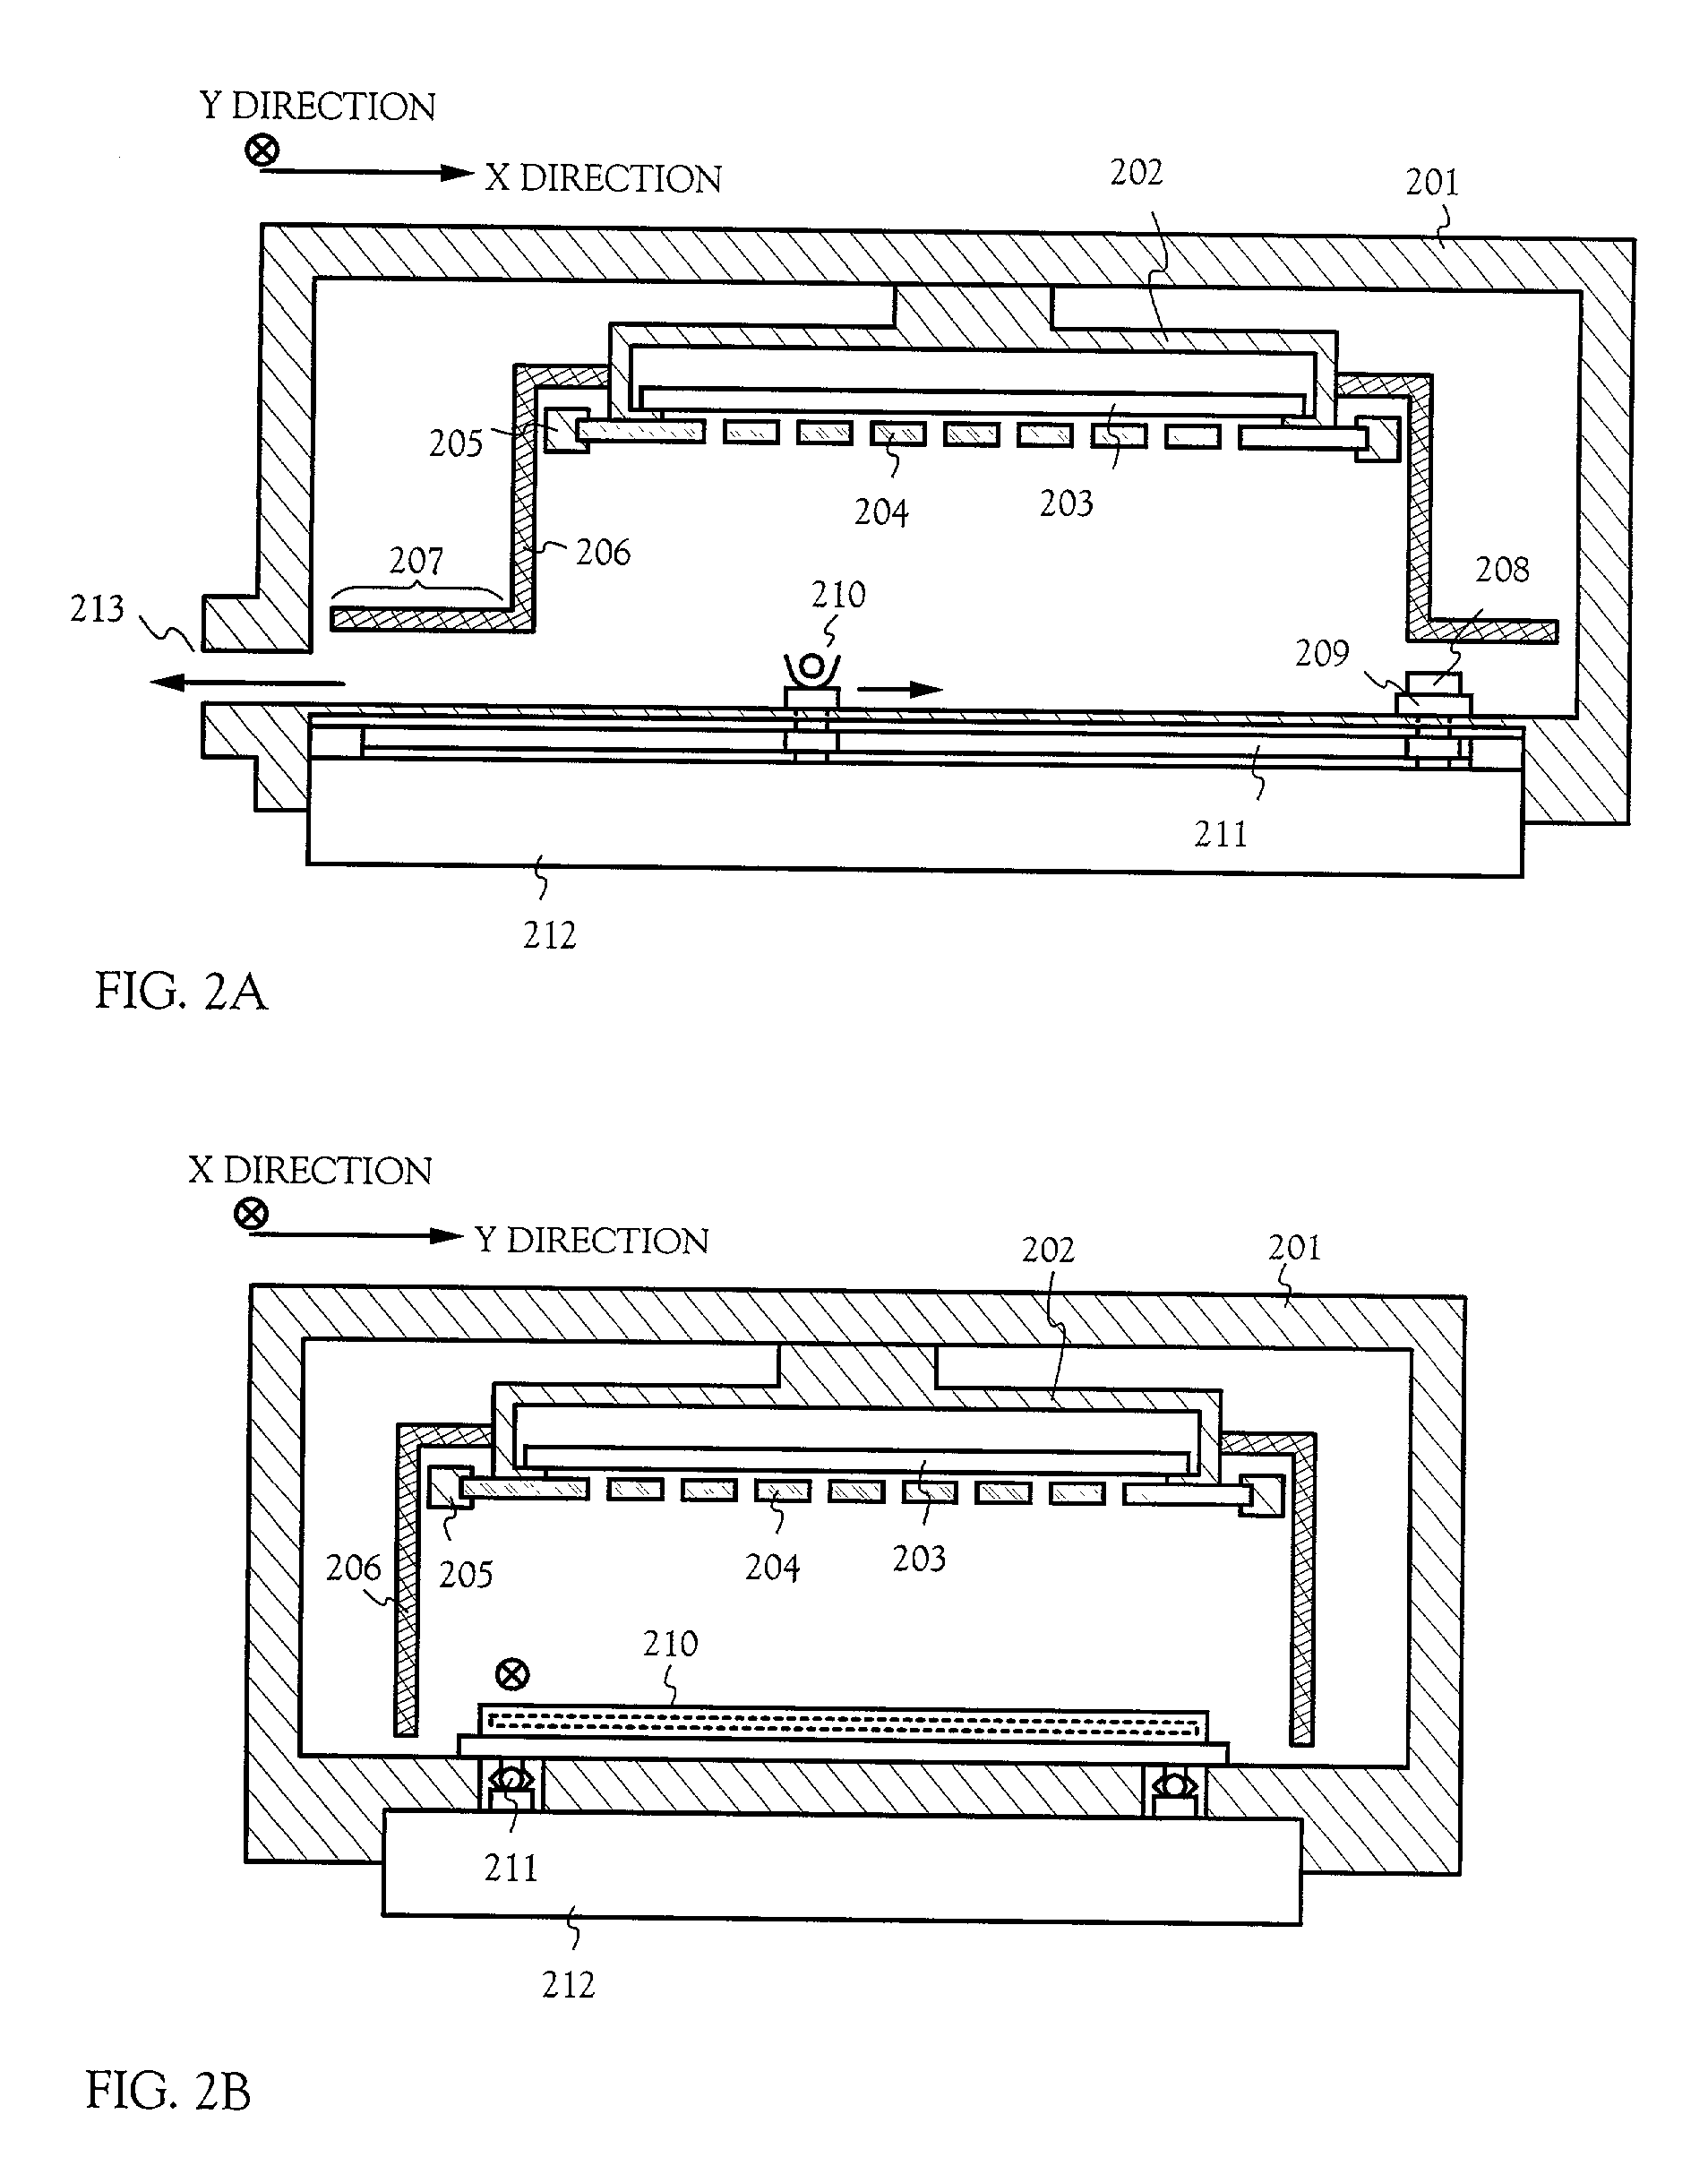 Film-forming apparatus, method of cleaning the same, and method of manufacturing a light-emitting device